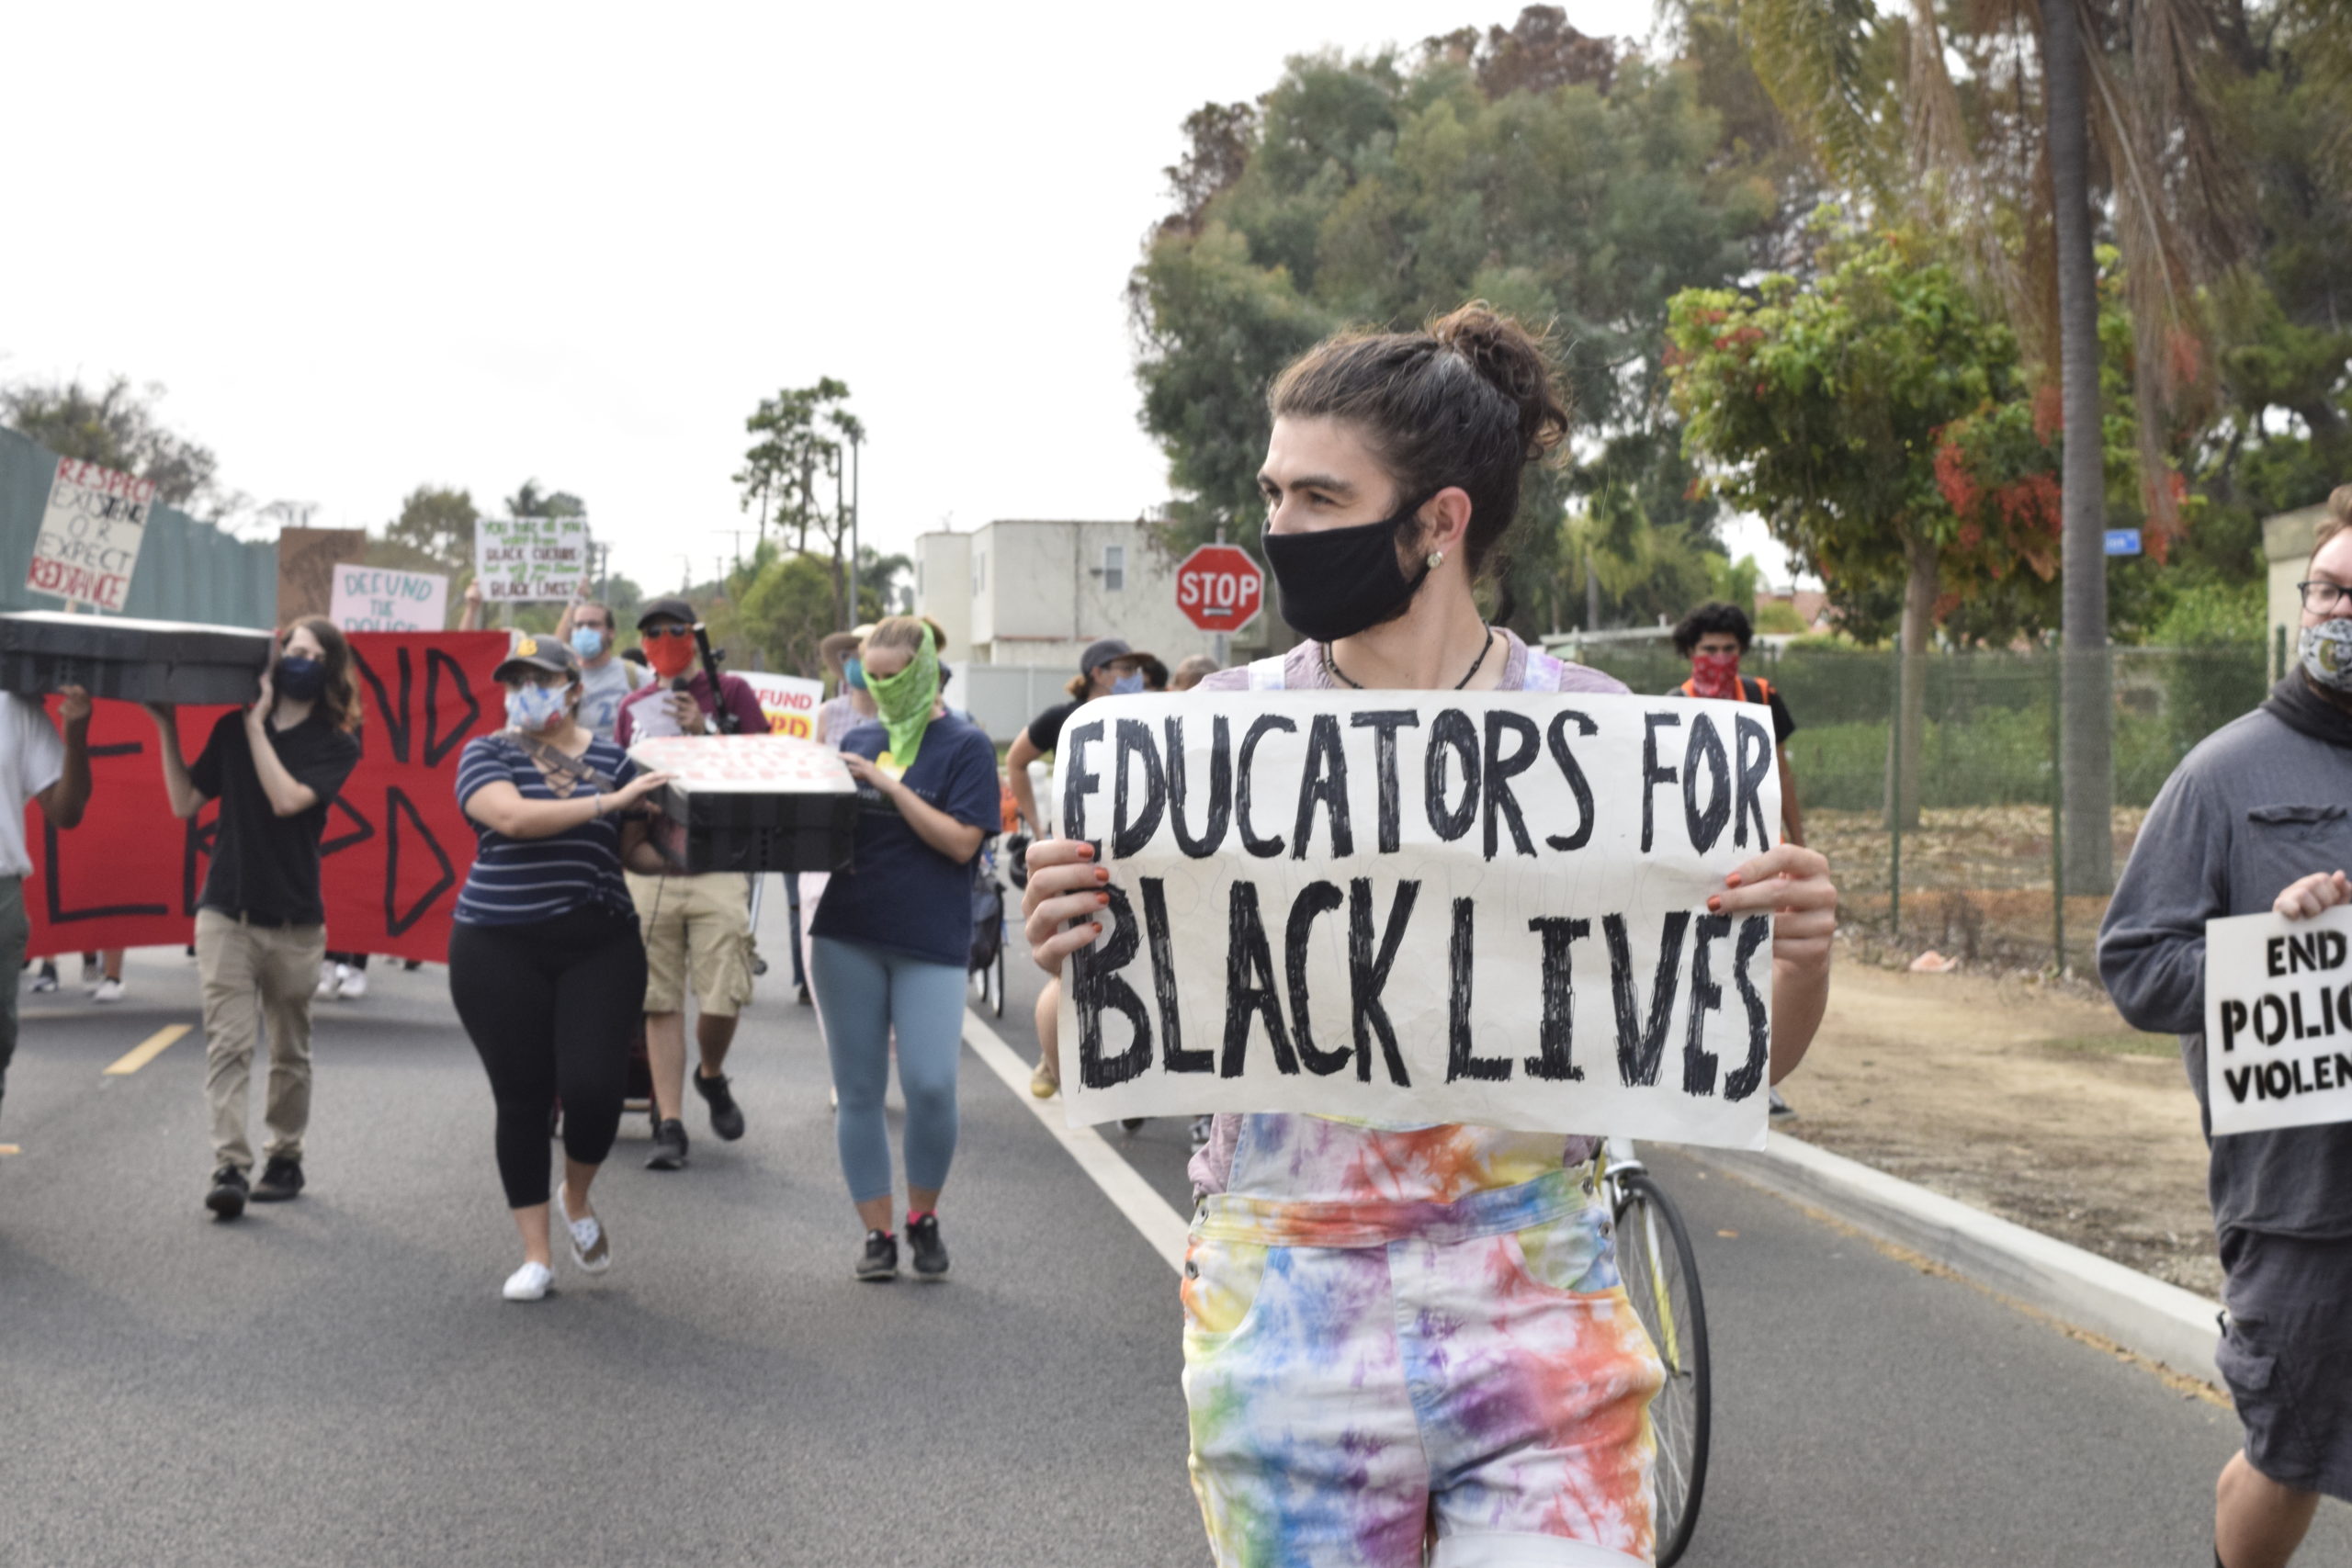 A man marches with a sign that reads "Educators for Black Lives"